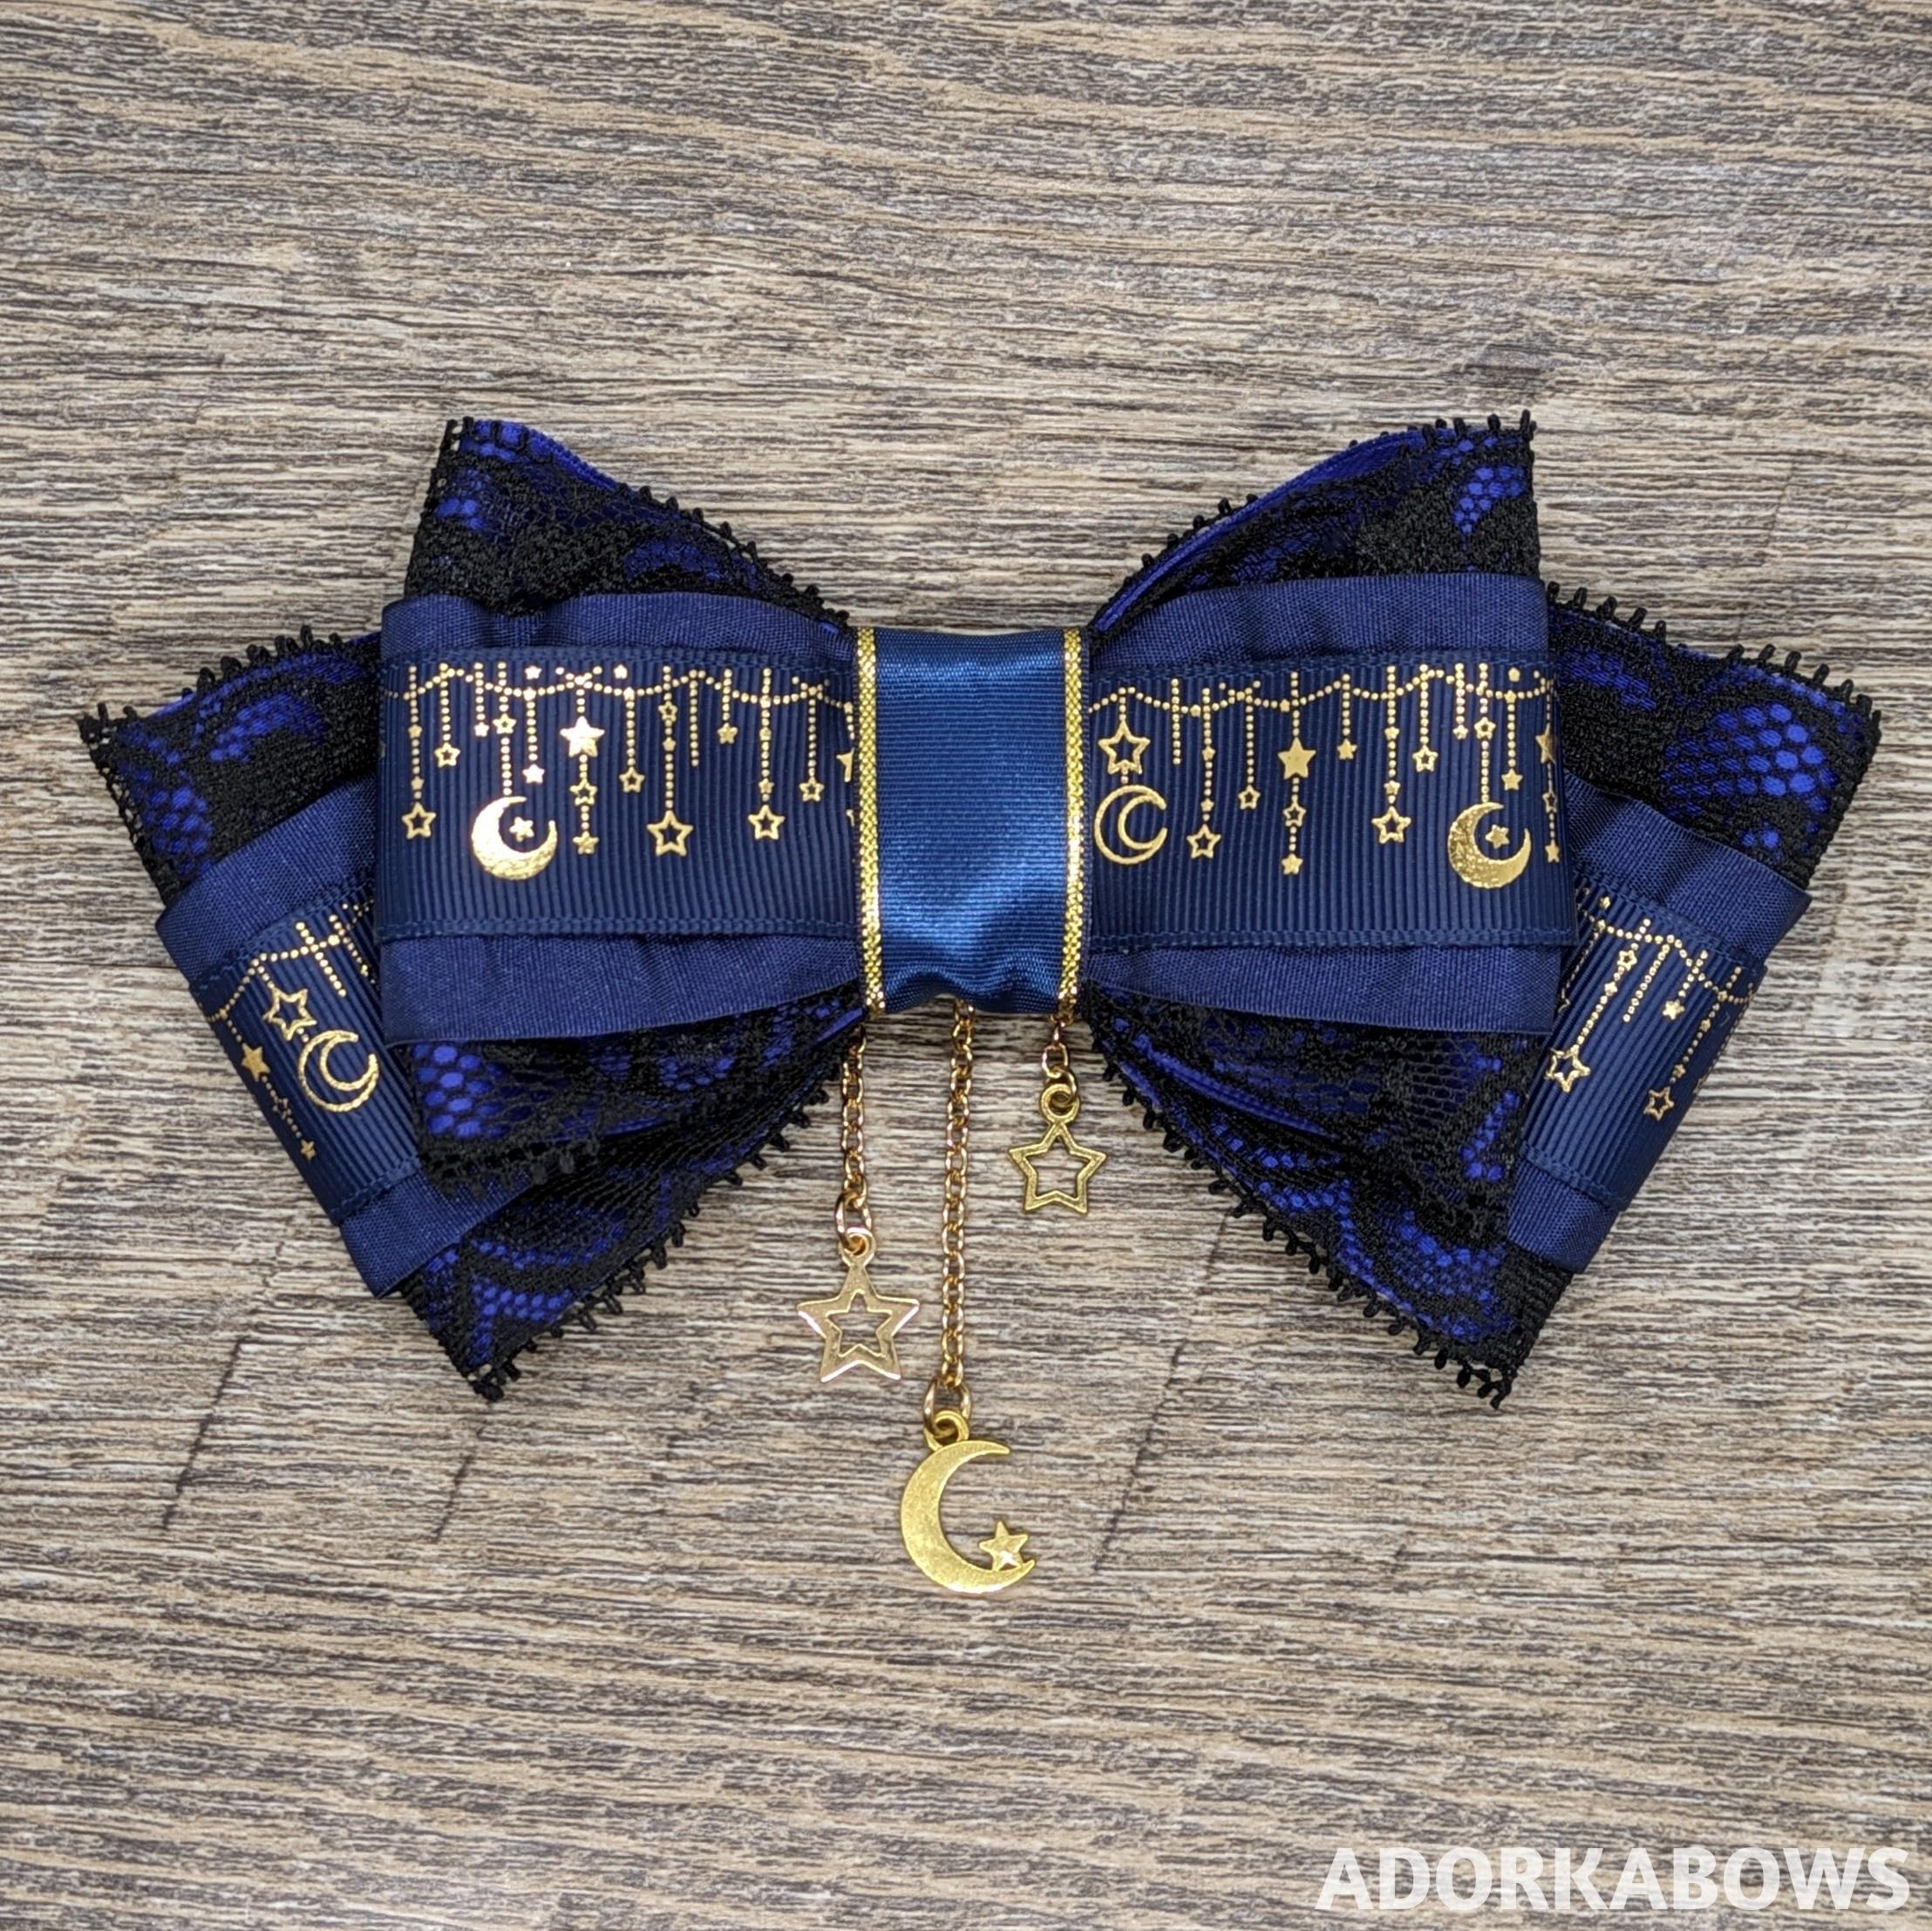 A handsewn navy hair bow with gold accents